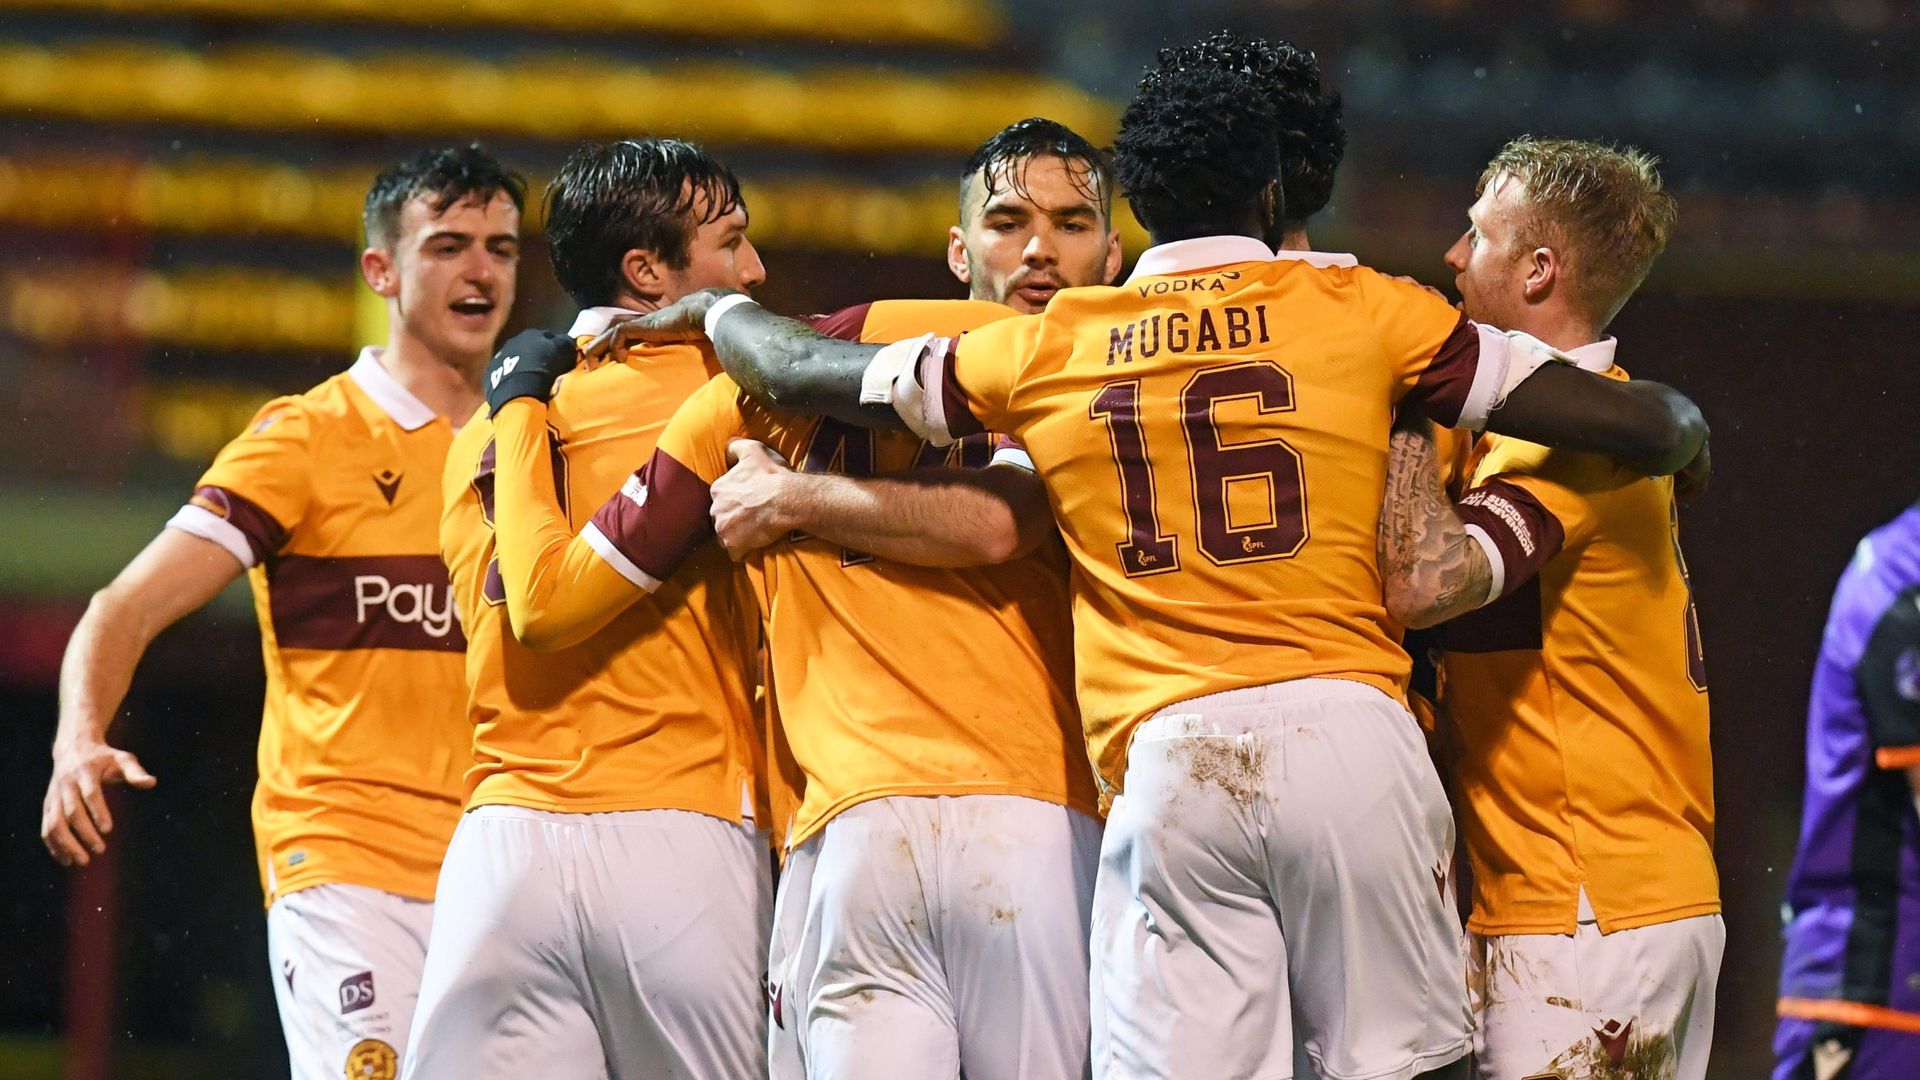 Cole and Long fire Motherwell past Dundee United